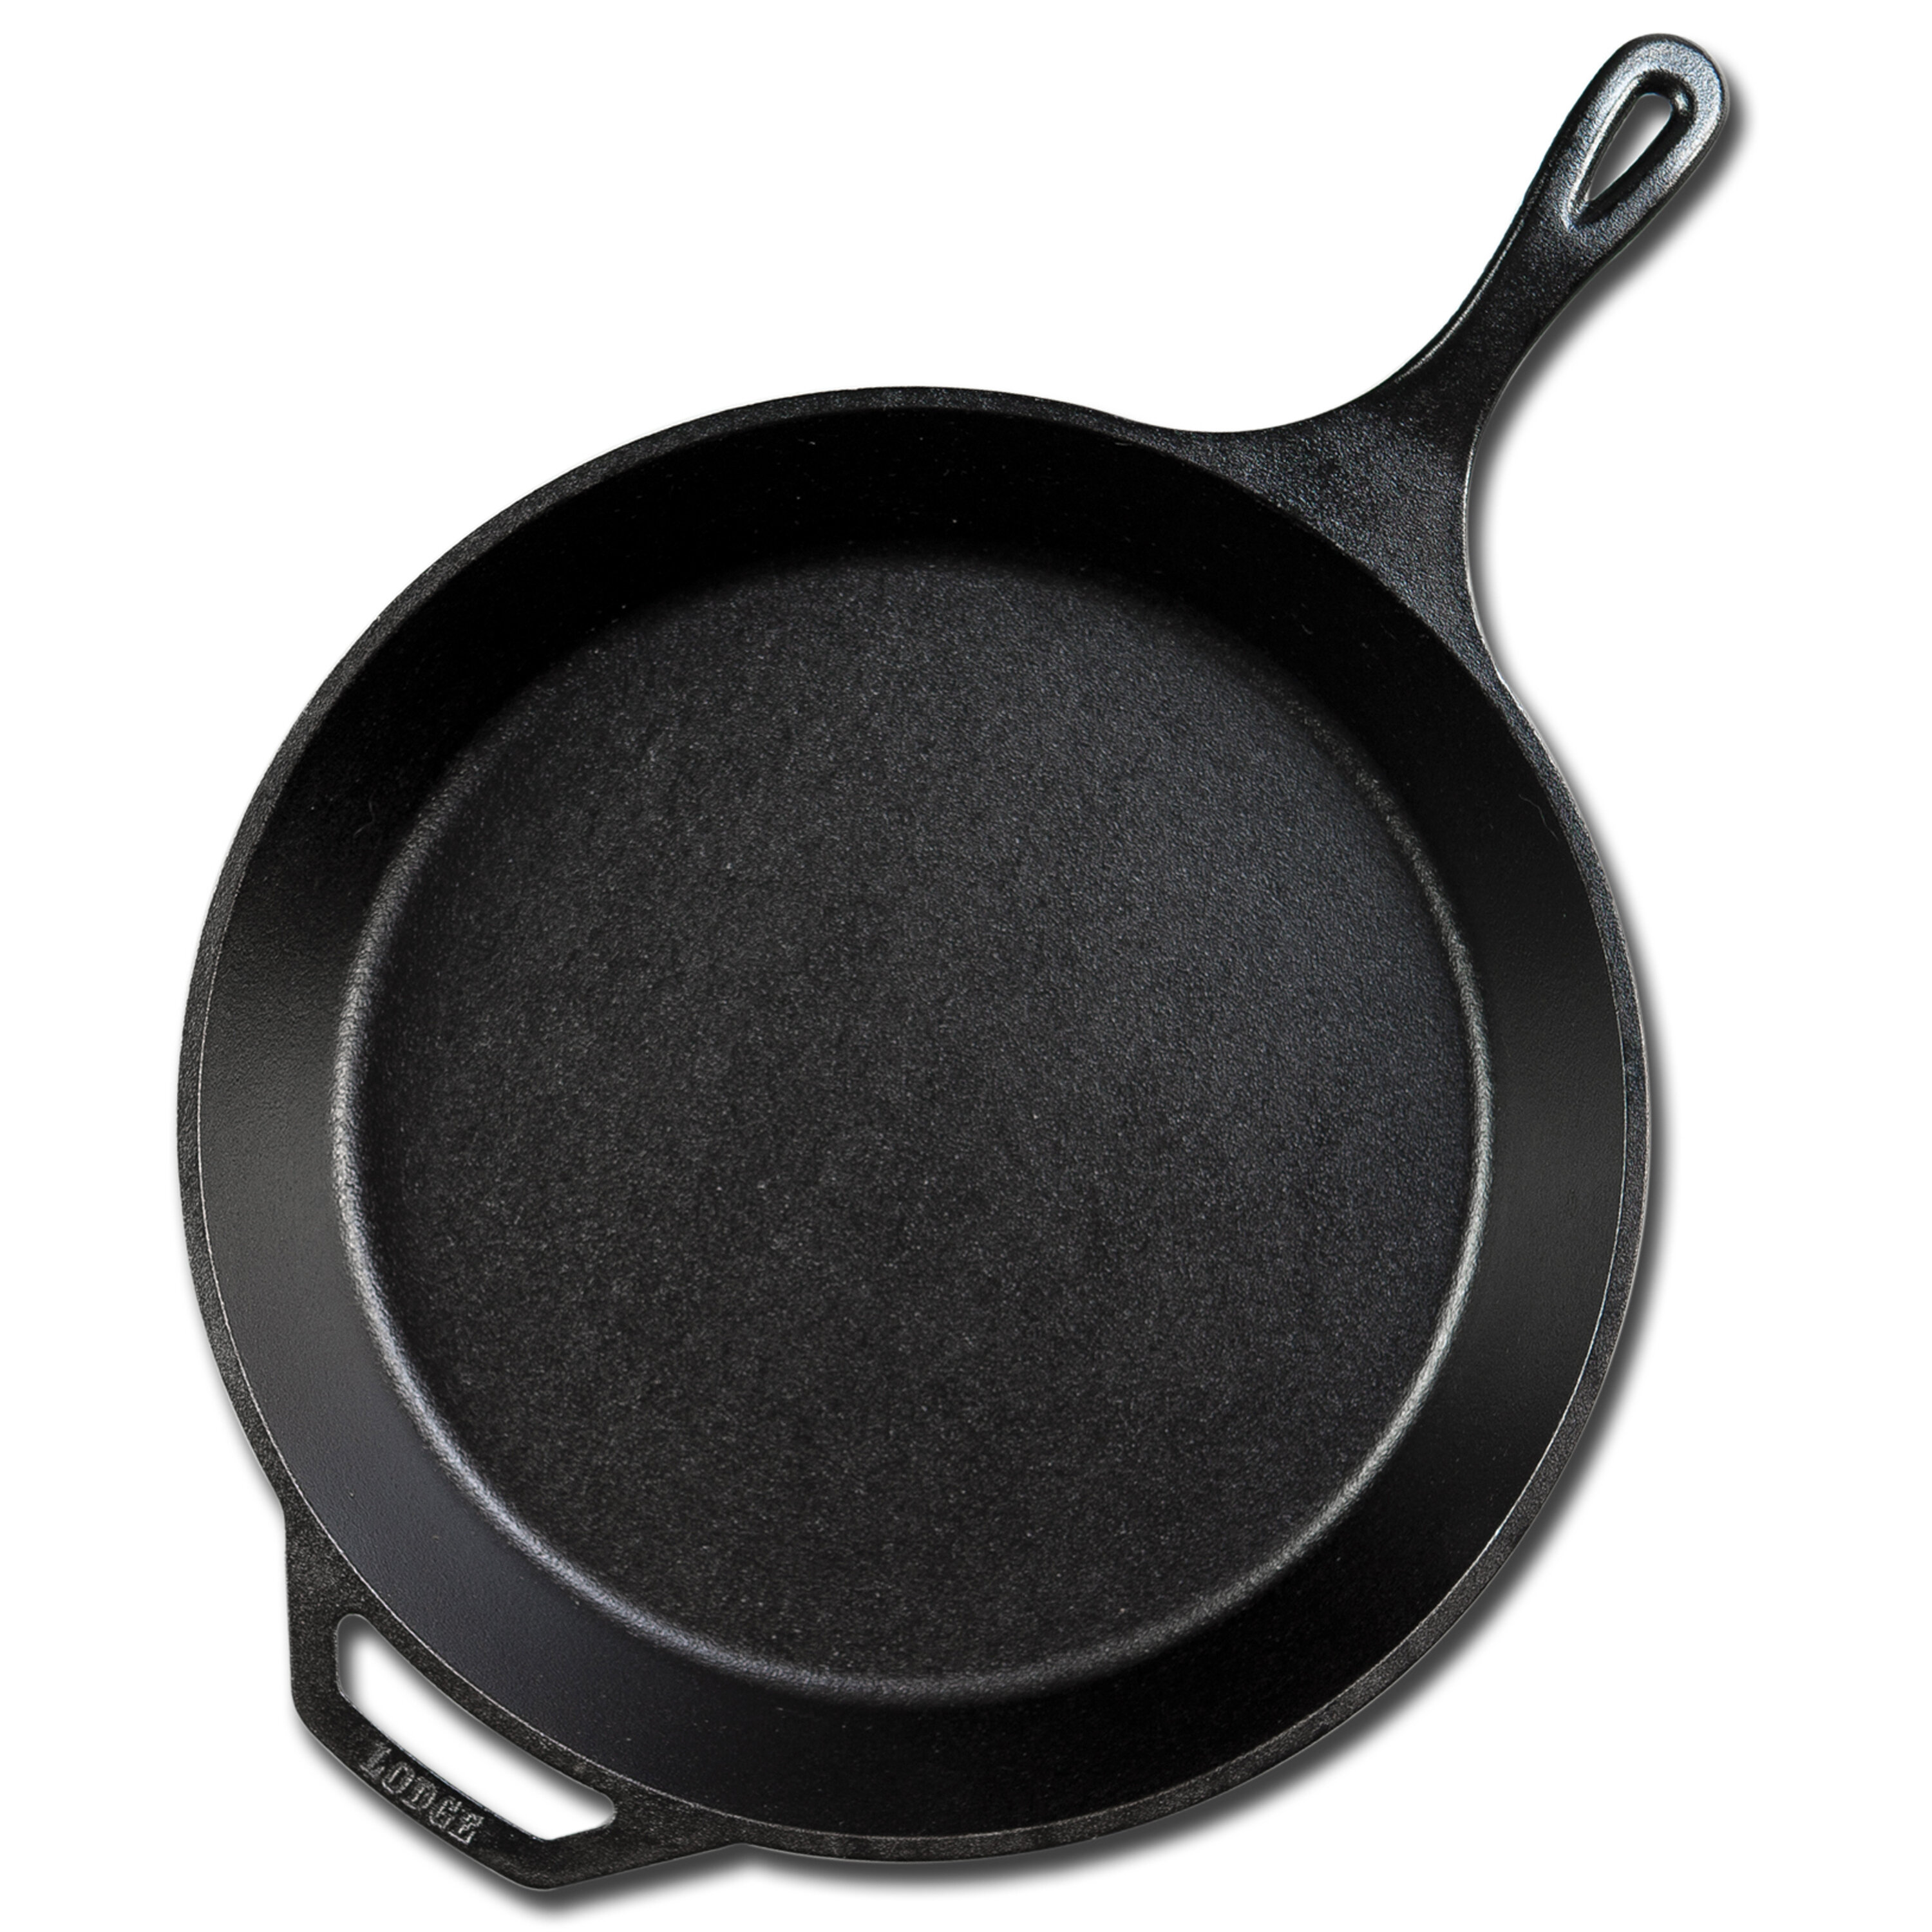  Lodge L10SK3 12 Skillet With Assist Handle: Home & Kitchen